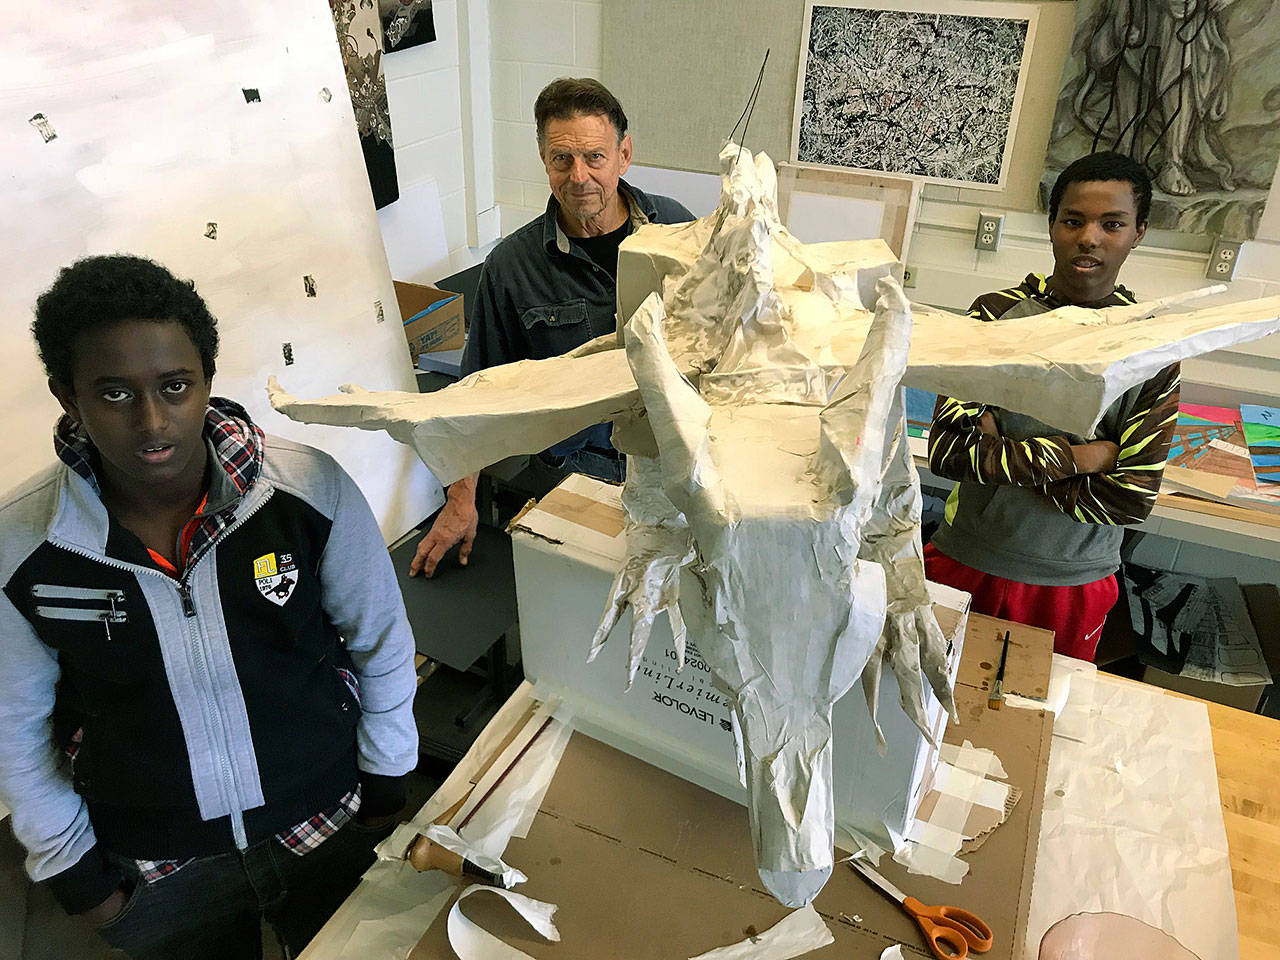 Kent-Meridian High School students Kaalid Arare, left, and Mohammed Shire worked with artist and volunteer Joe Lavely, middle, on the foundation for Maybelline the dragon, a public art project inspired by the popular series, ‘Game of Thrones.” The dragon will be a special guest at the President’s Gala Business Leadership Excellence Awards presented by the Kent Chamber of Commerce and Republic Services on May 18 at the ShoWare Center. MARK KLAAS, Kent Reporter